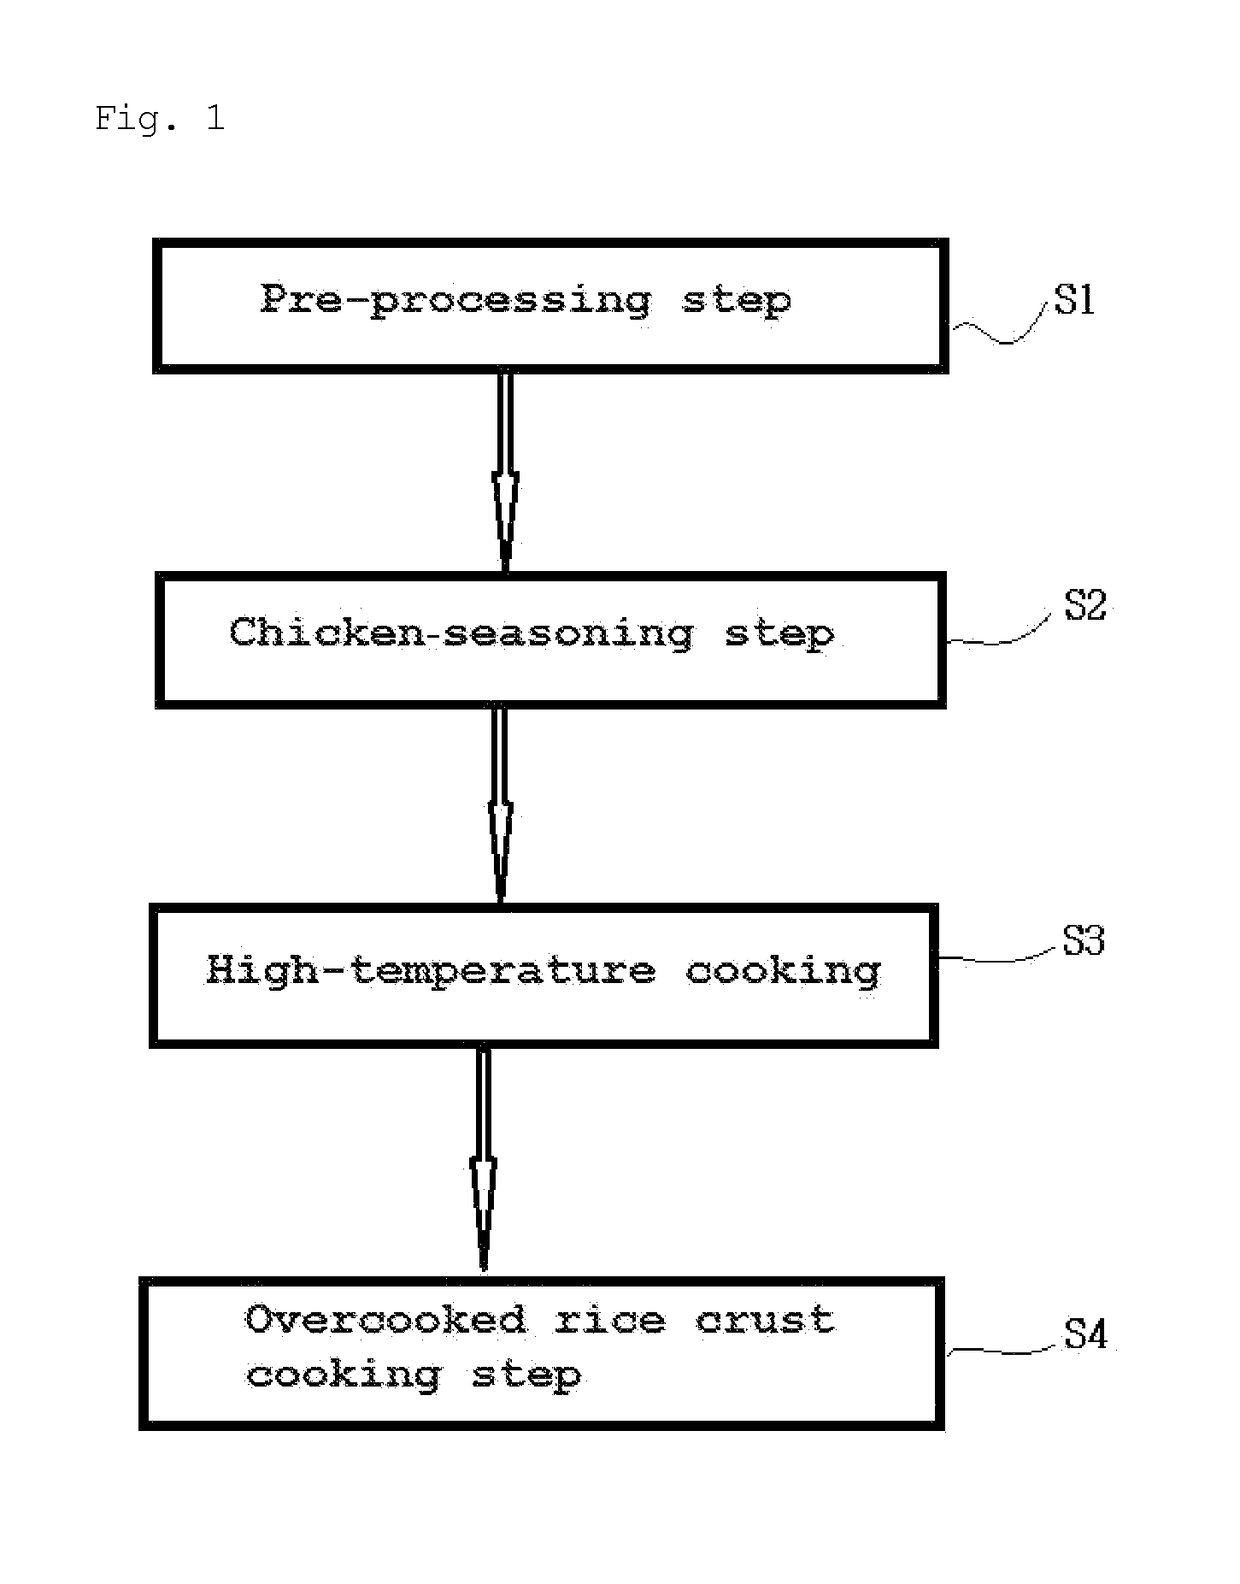 Method for cooking a chicken with an overcooked rice crust